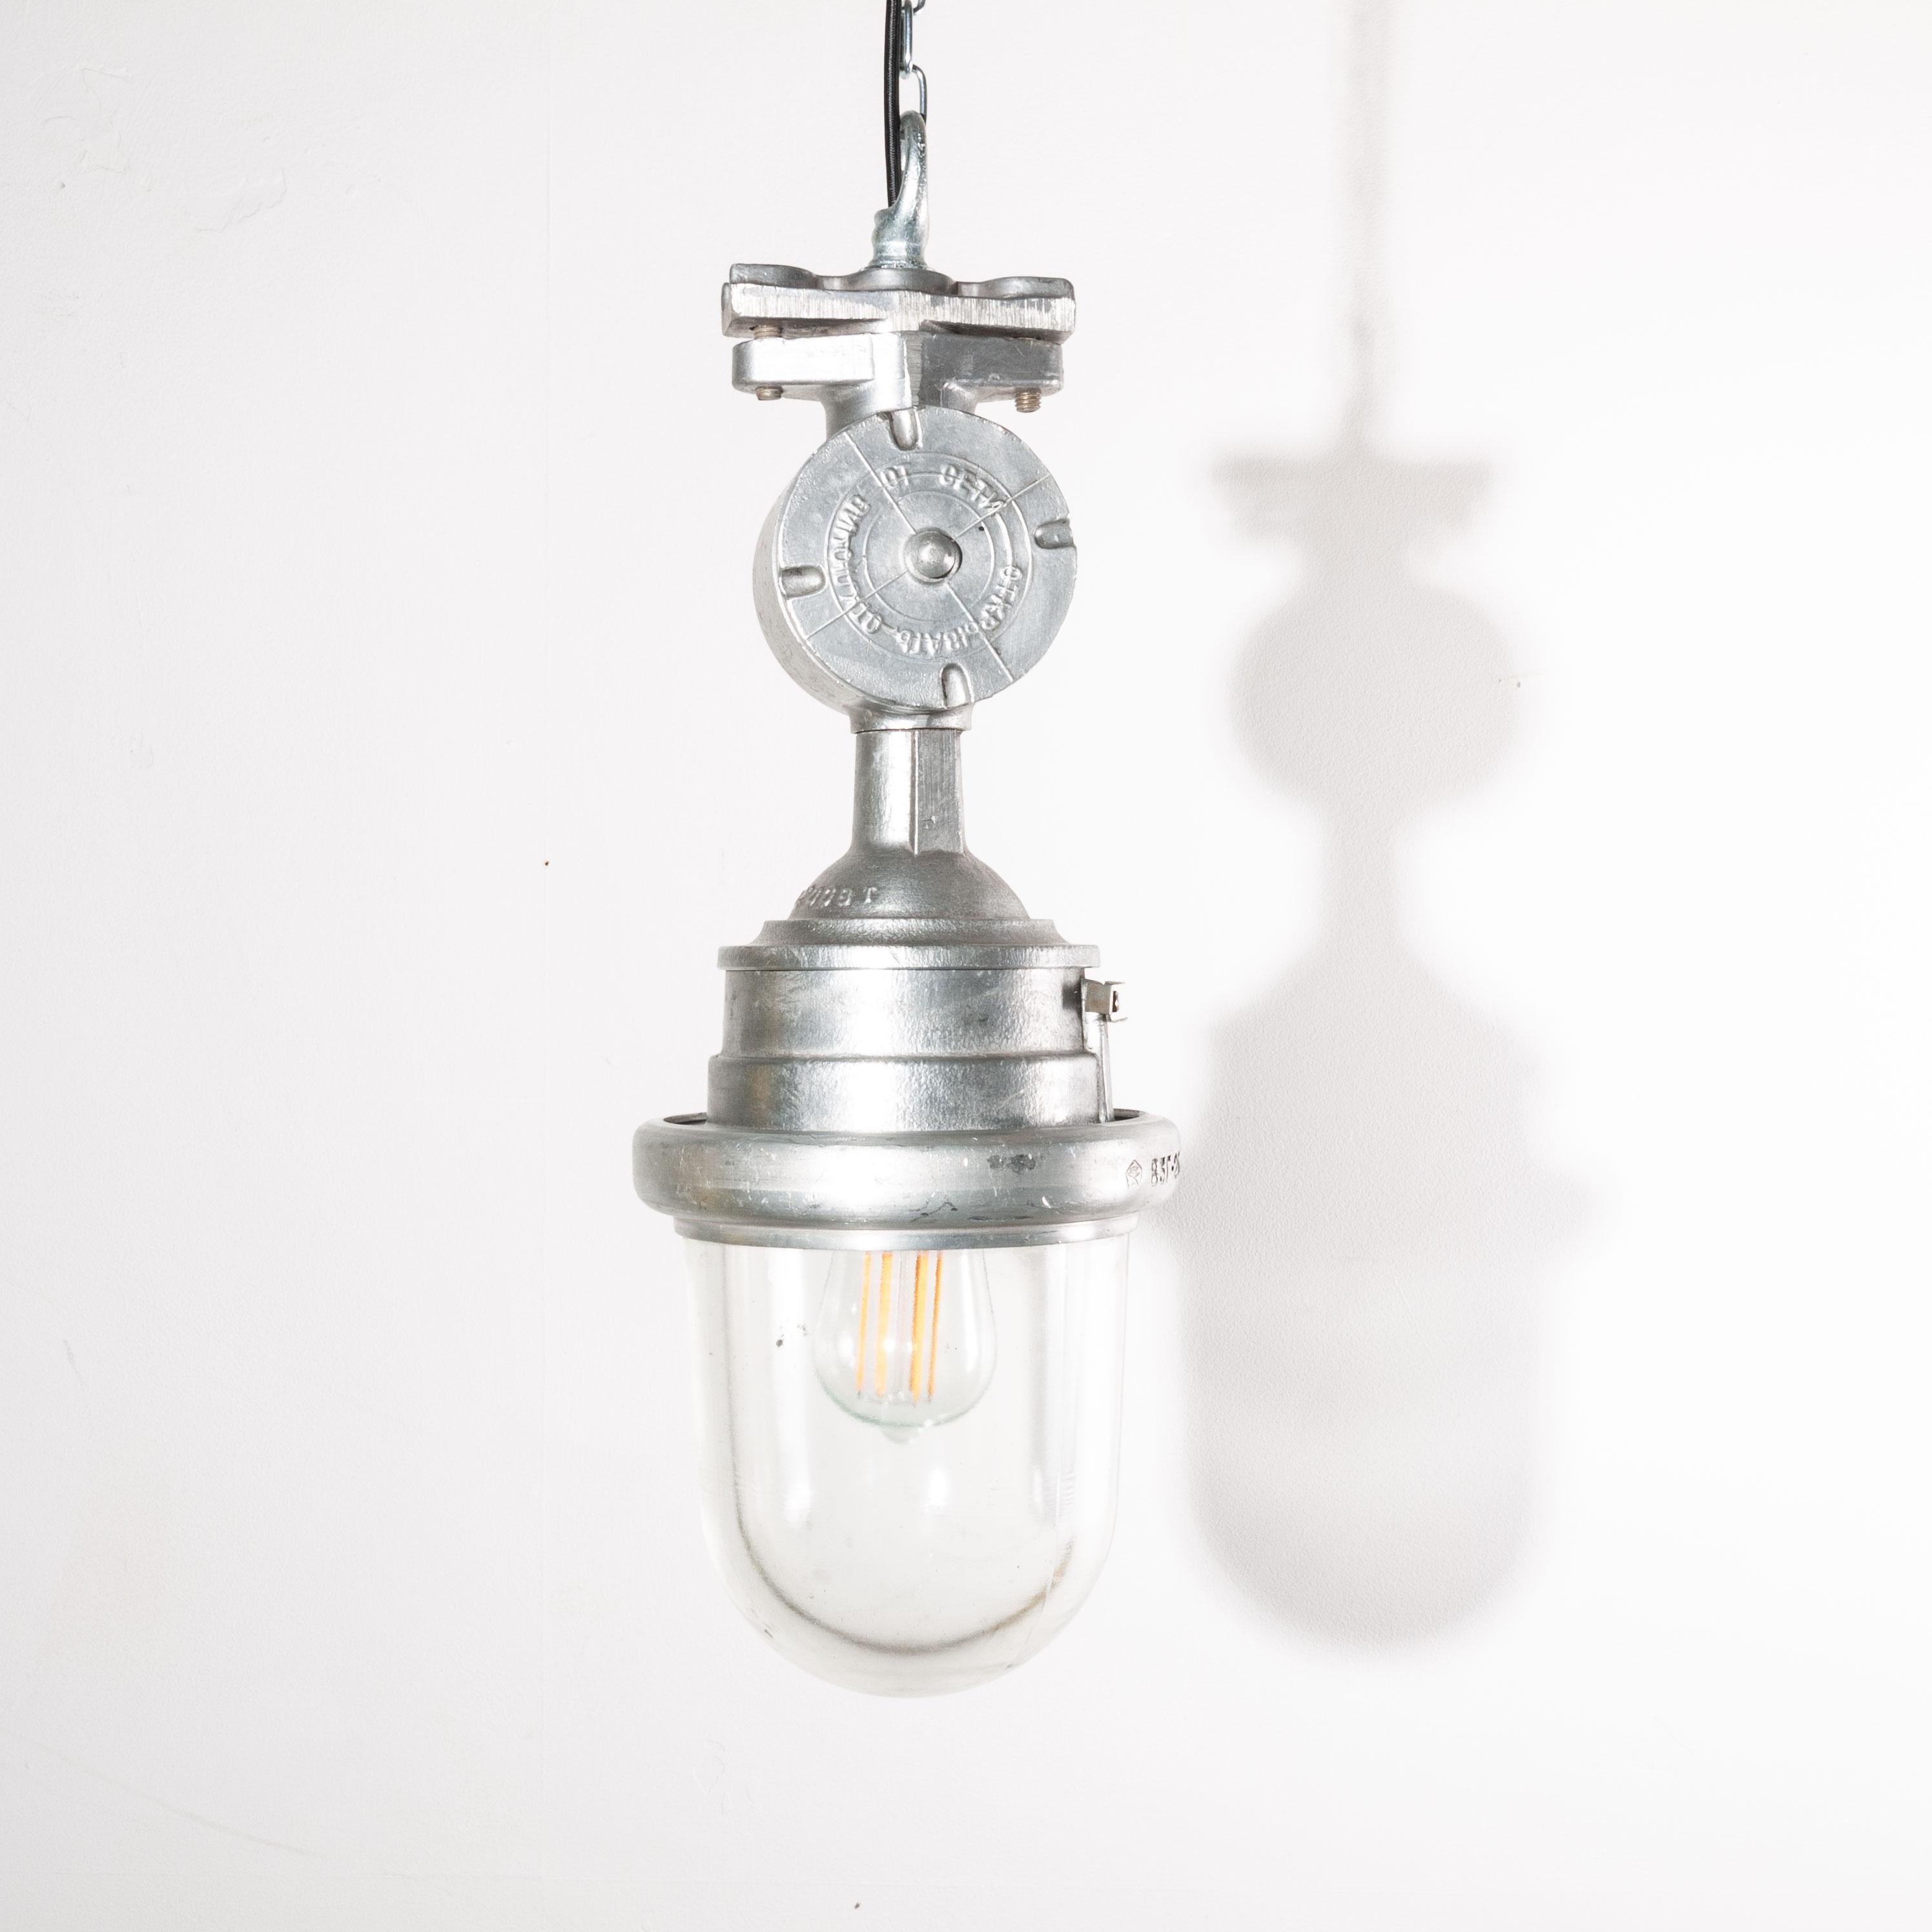 1960s vintage original industrial explosion proof ceiling pendant lamps/lights with glass domes. A hugely popular lamps we have a number of these stunning lamps available. Made from cast aluminium each with their own weathered and patinated original